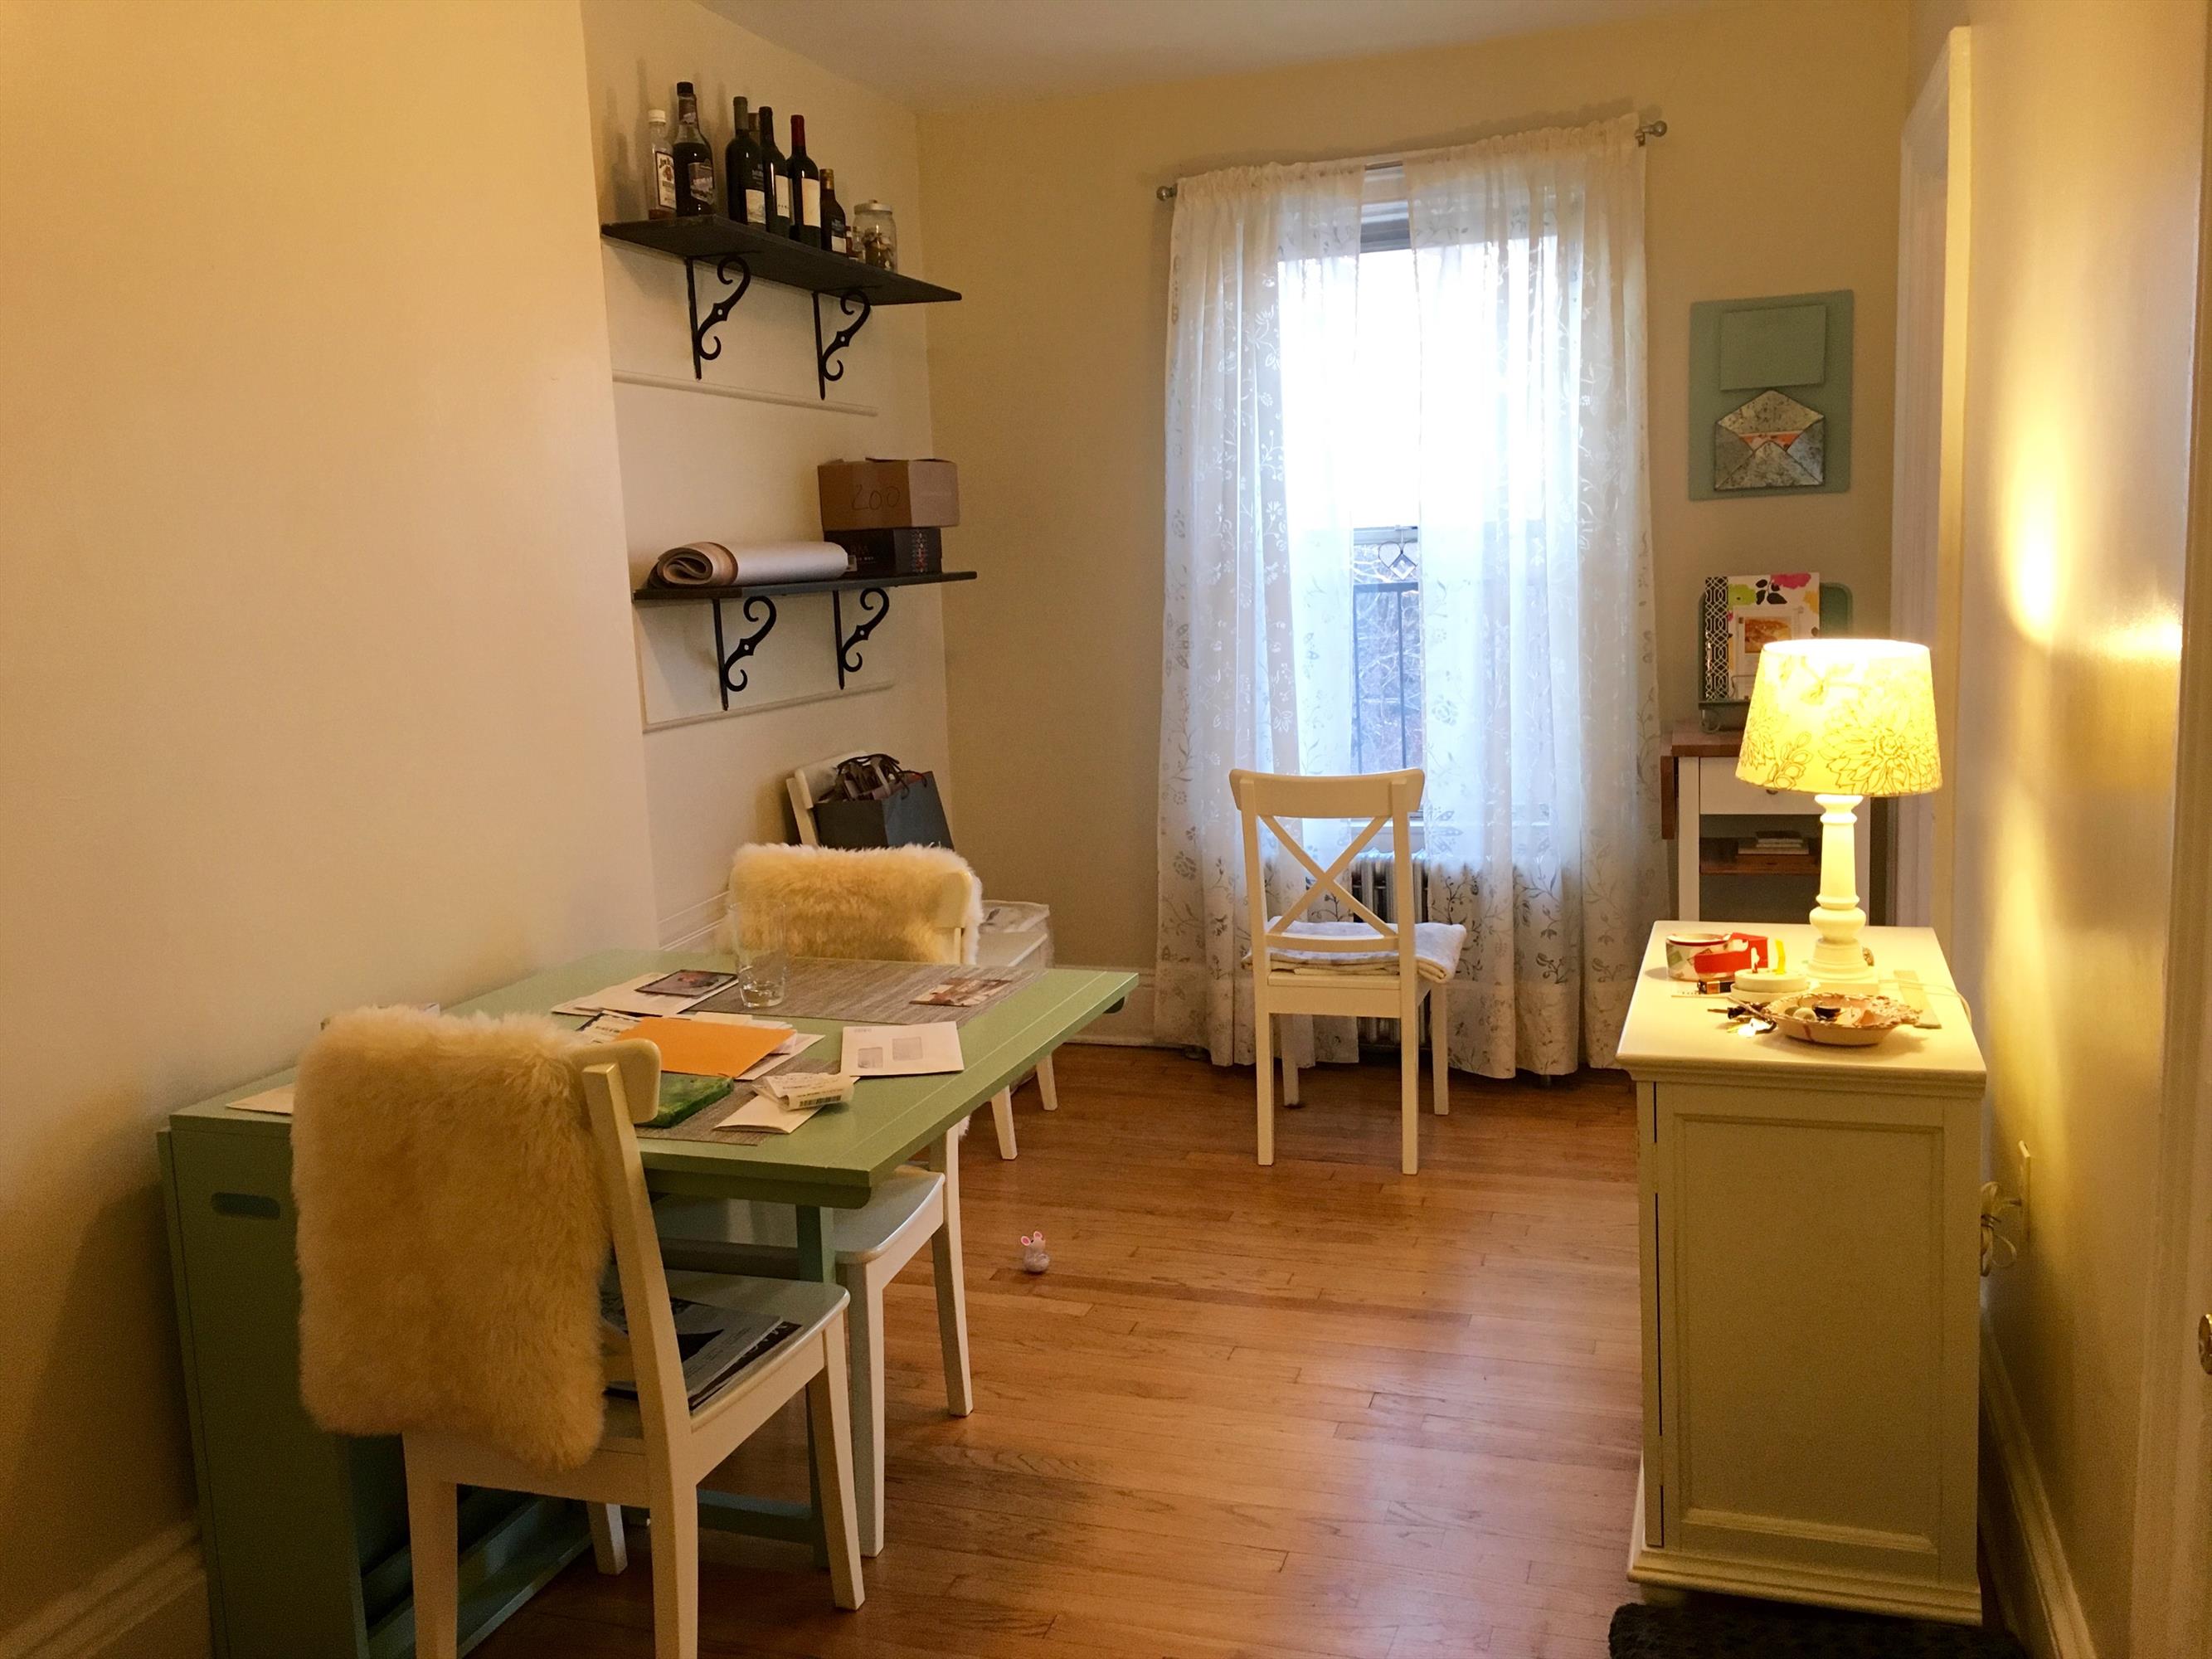 Beautiful and Spacious 1Bd/1Bth apt With Heat & Hot Water Included, Featuring, Hardwood Floors, French Doors and is only Blocks from Transportation to NYC, Shopping, Dining/Bars and Much More...Wont Last!  One Month Broker Fee!


